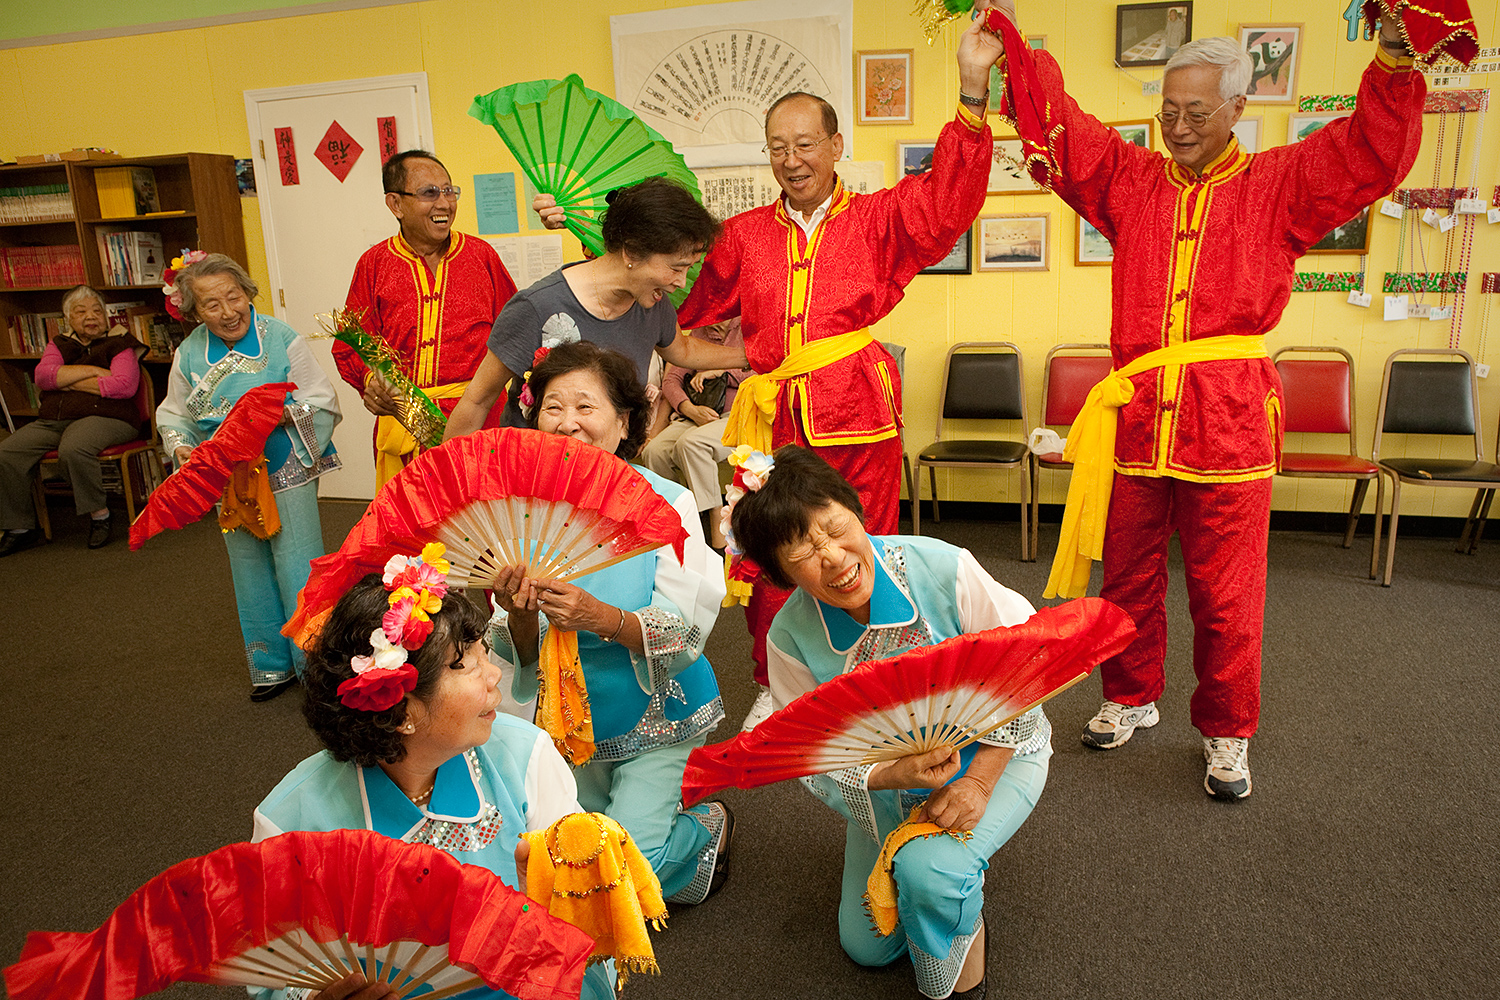  A group at the St. Louis Christian Chinese Community Service Center practices a performance for their annual fundraiser night. St. Louis, Missouri. 